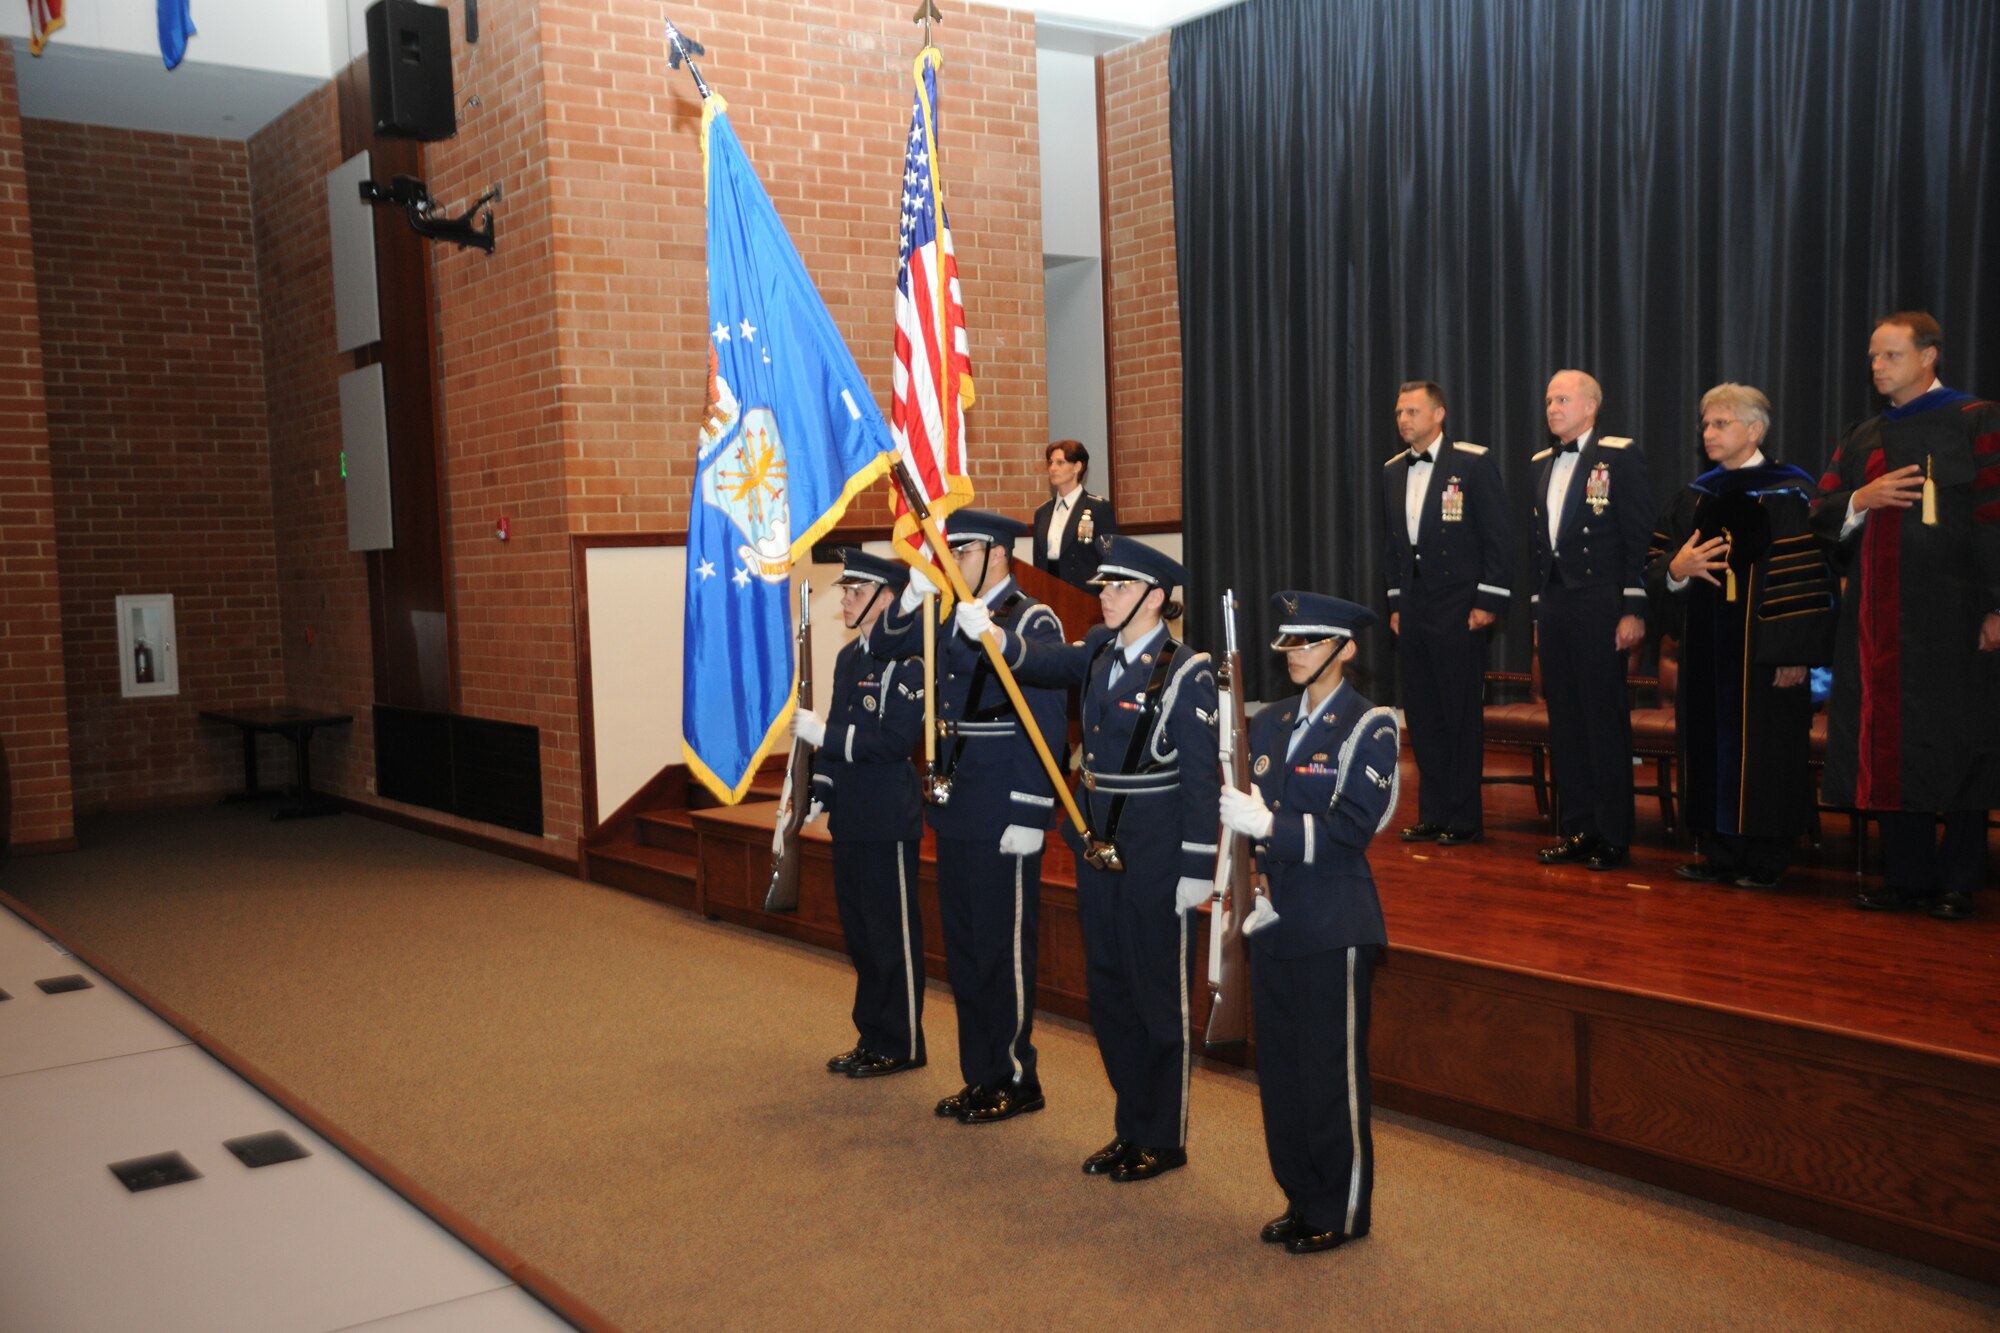 Members of the Joint Base McGuire-Dix-Lakehurst Honor Guard post the colors during the U.S. Air Force Expeditionary Center’s Advanced Study of Air Mobility June 18.  Brig. Gen. Scott Hanson, 321st Expeditionary Wing commander, Brig. Gen. Richard Devereaux, Expeditionary Center commander, and Dr. Paul Wolf, Associate Dean for Academic Affairs for the Air Force Institute of Technology officiated the ceremony and presented master of science degrees to 16 majors for the research in mobility and logistics concepts. (U.S. Air Force photo by Staff Sgt. Zachary Wilson/Released)